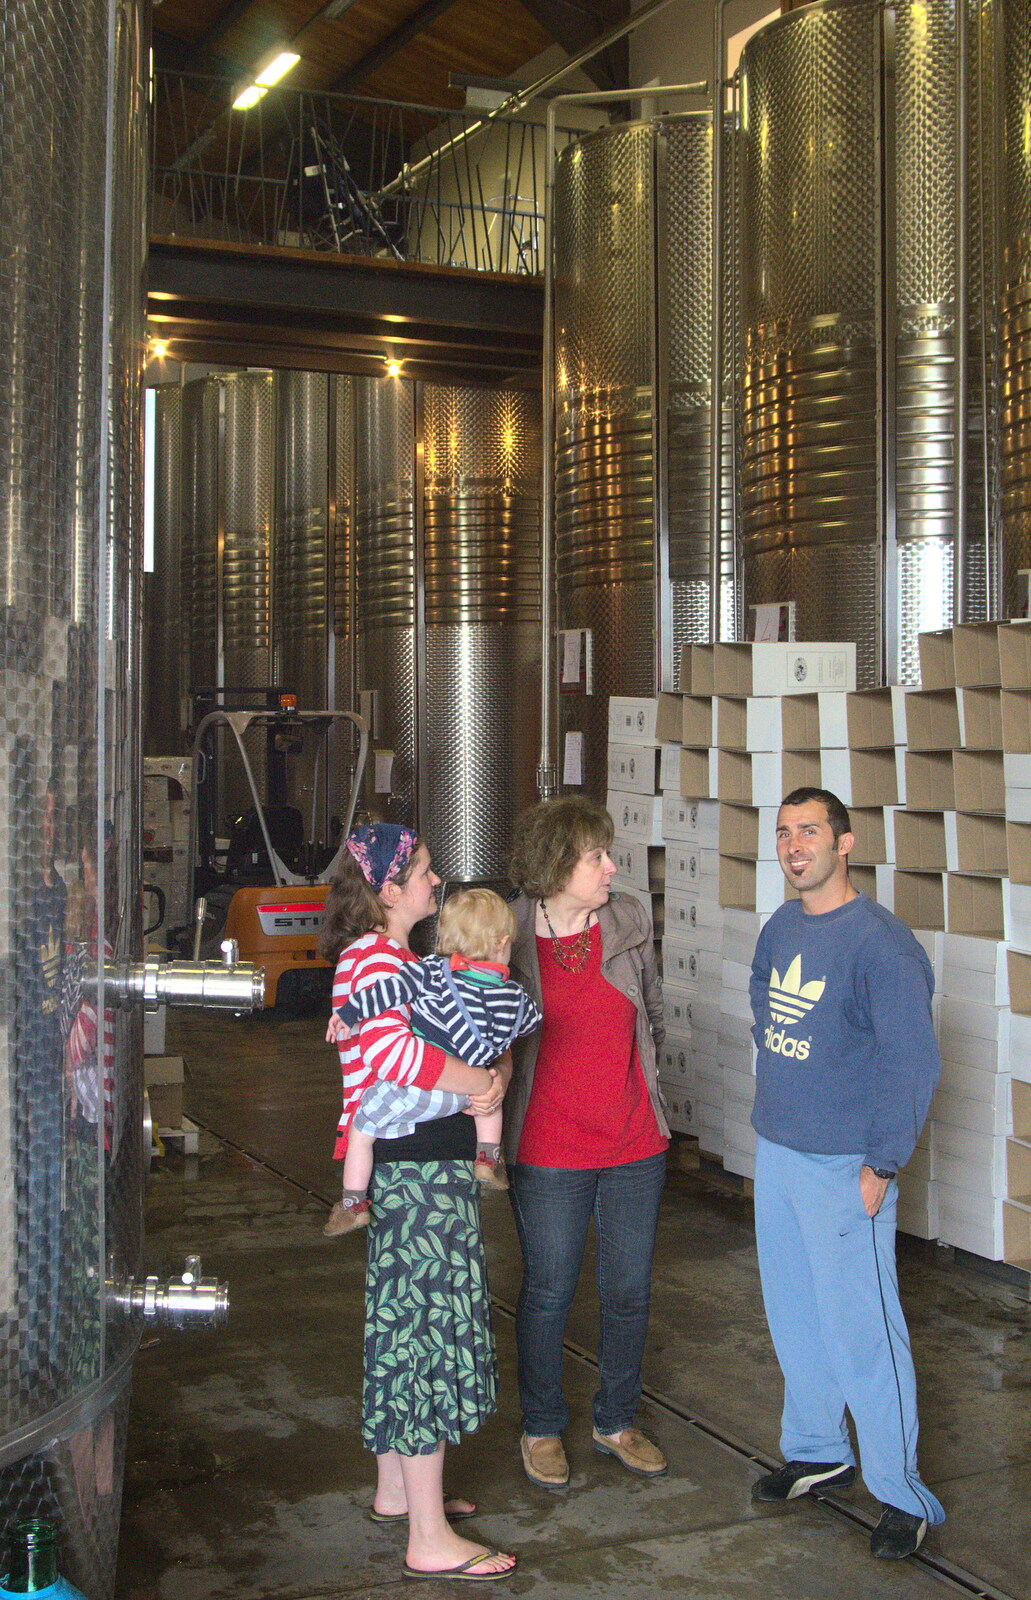 A Tuscan Winery and a Trip to Siena, Tuscany, Italy - 10th June 2013: We're surrounded by 150,000 litre fermentation tanks